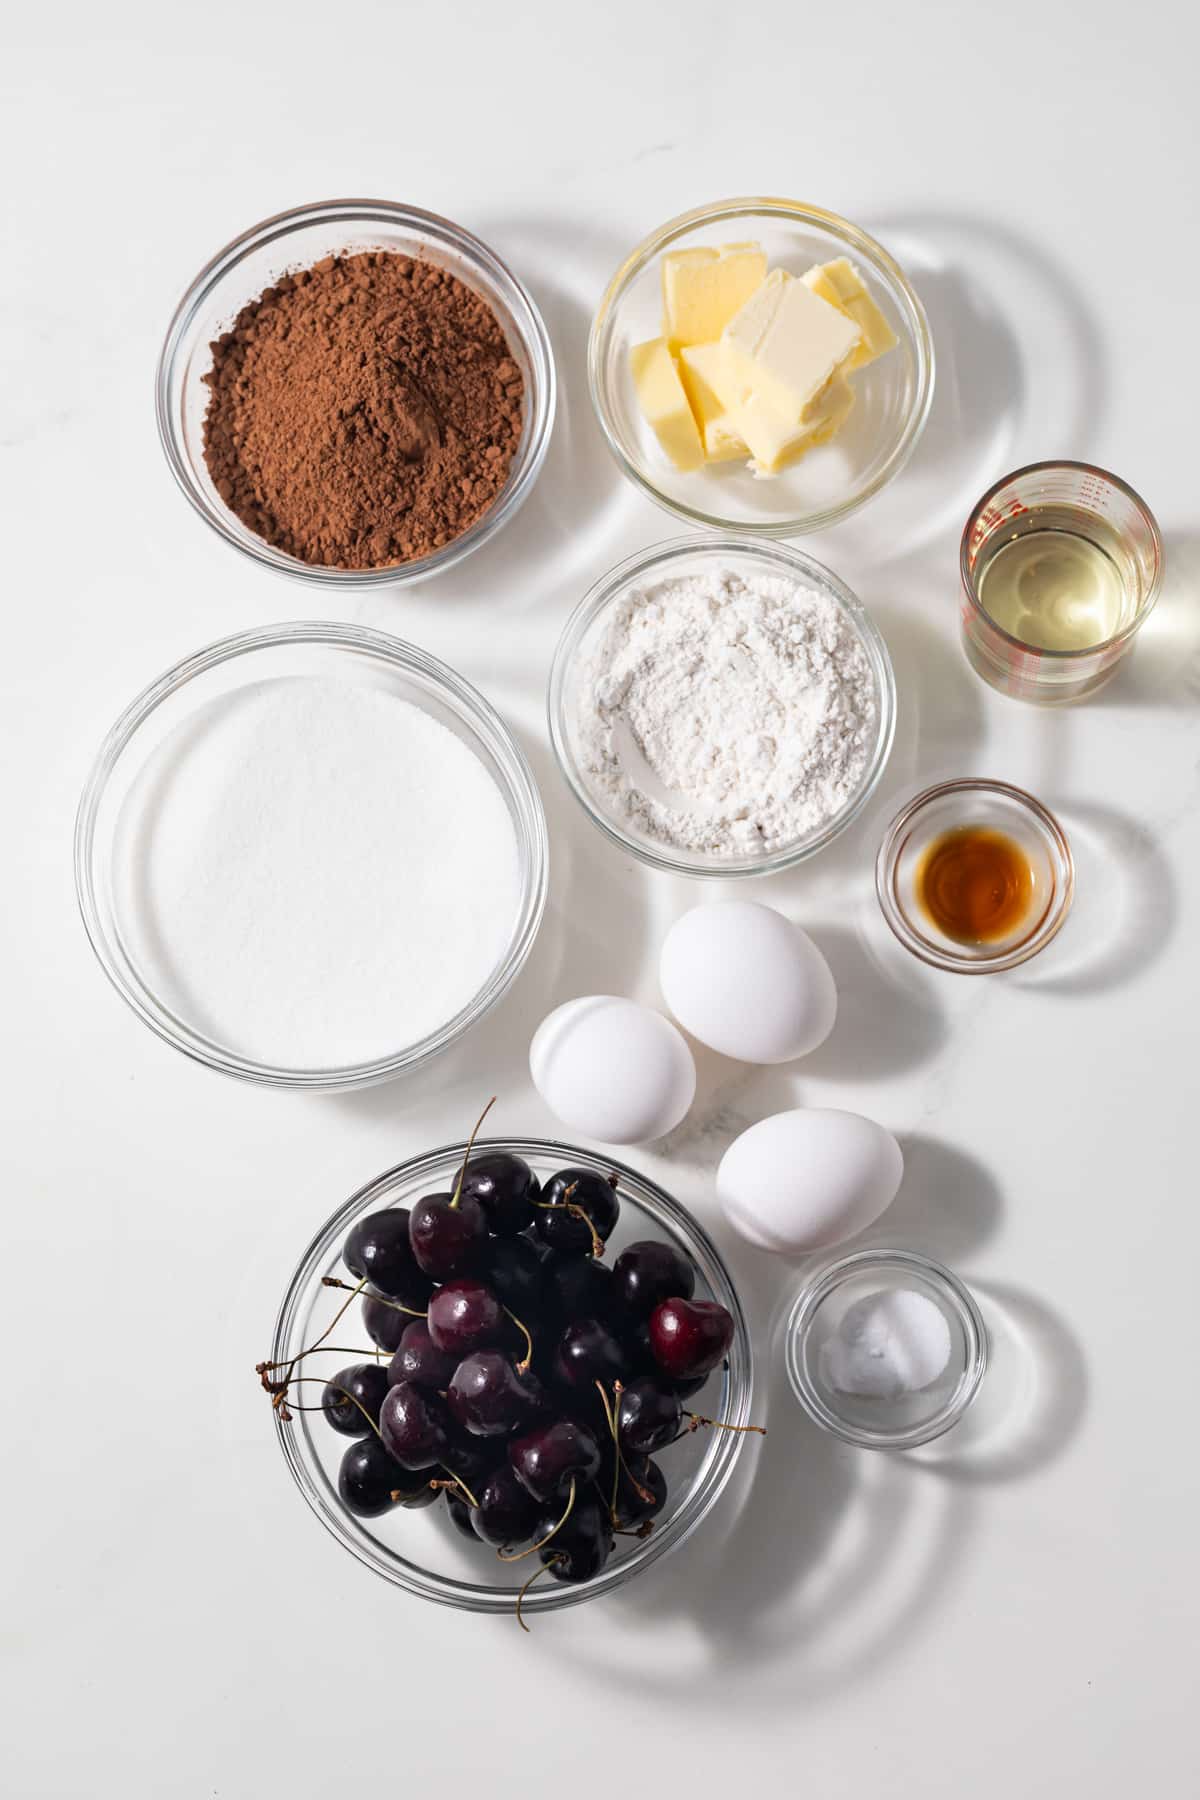 Ingredients for brownies with cherries in glass bowls.